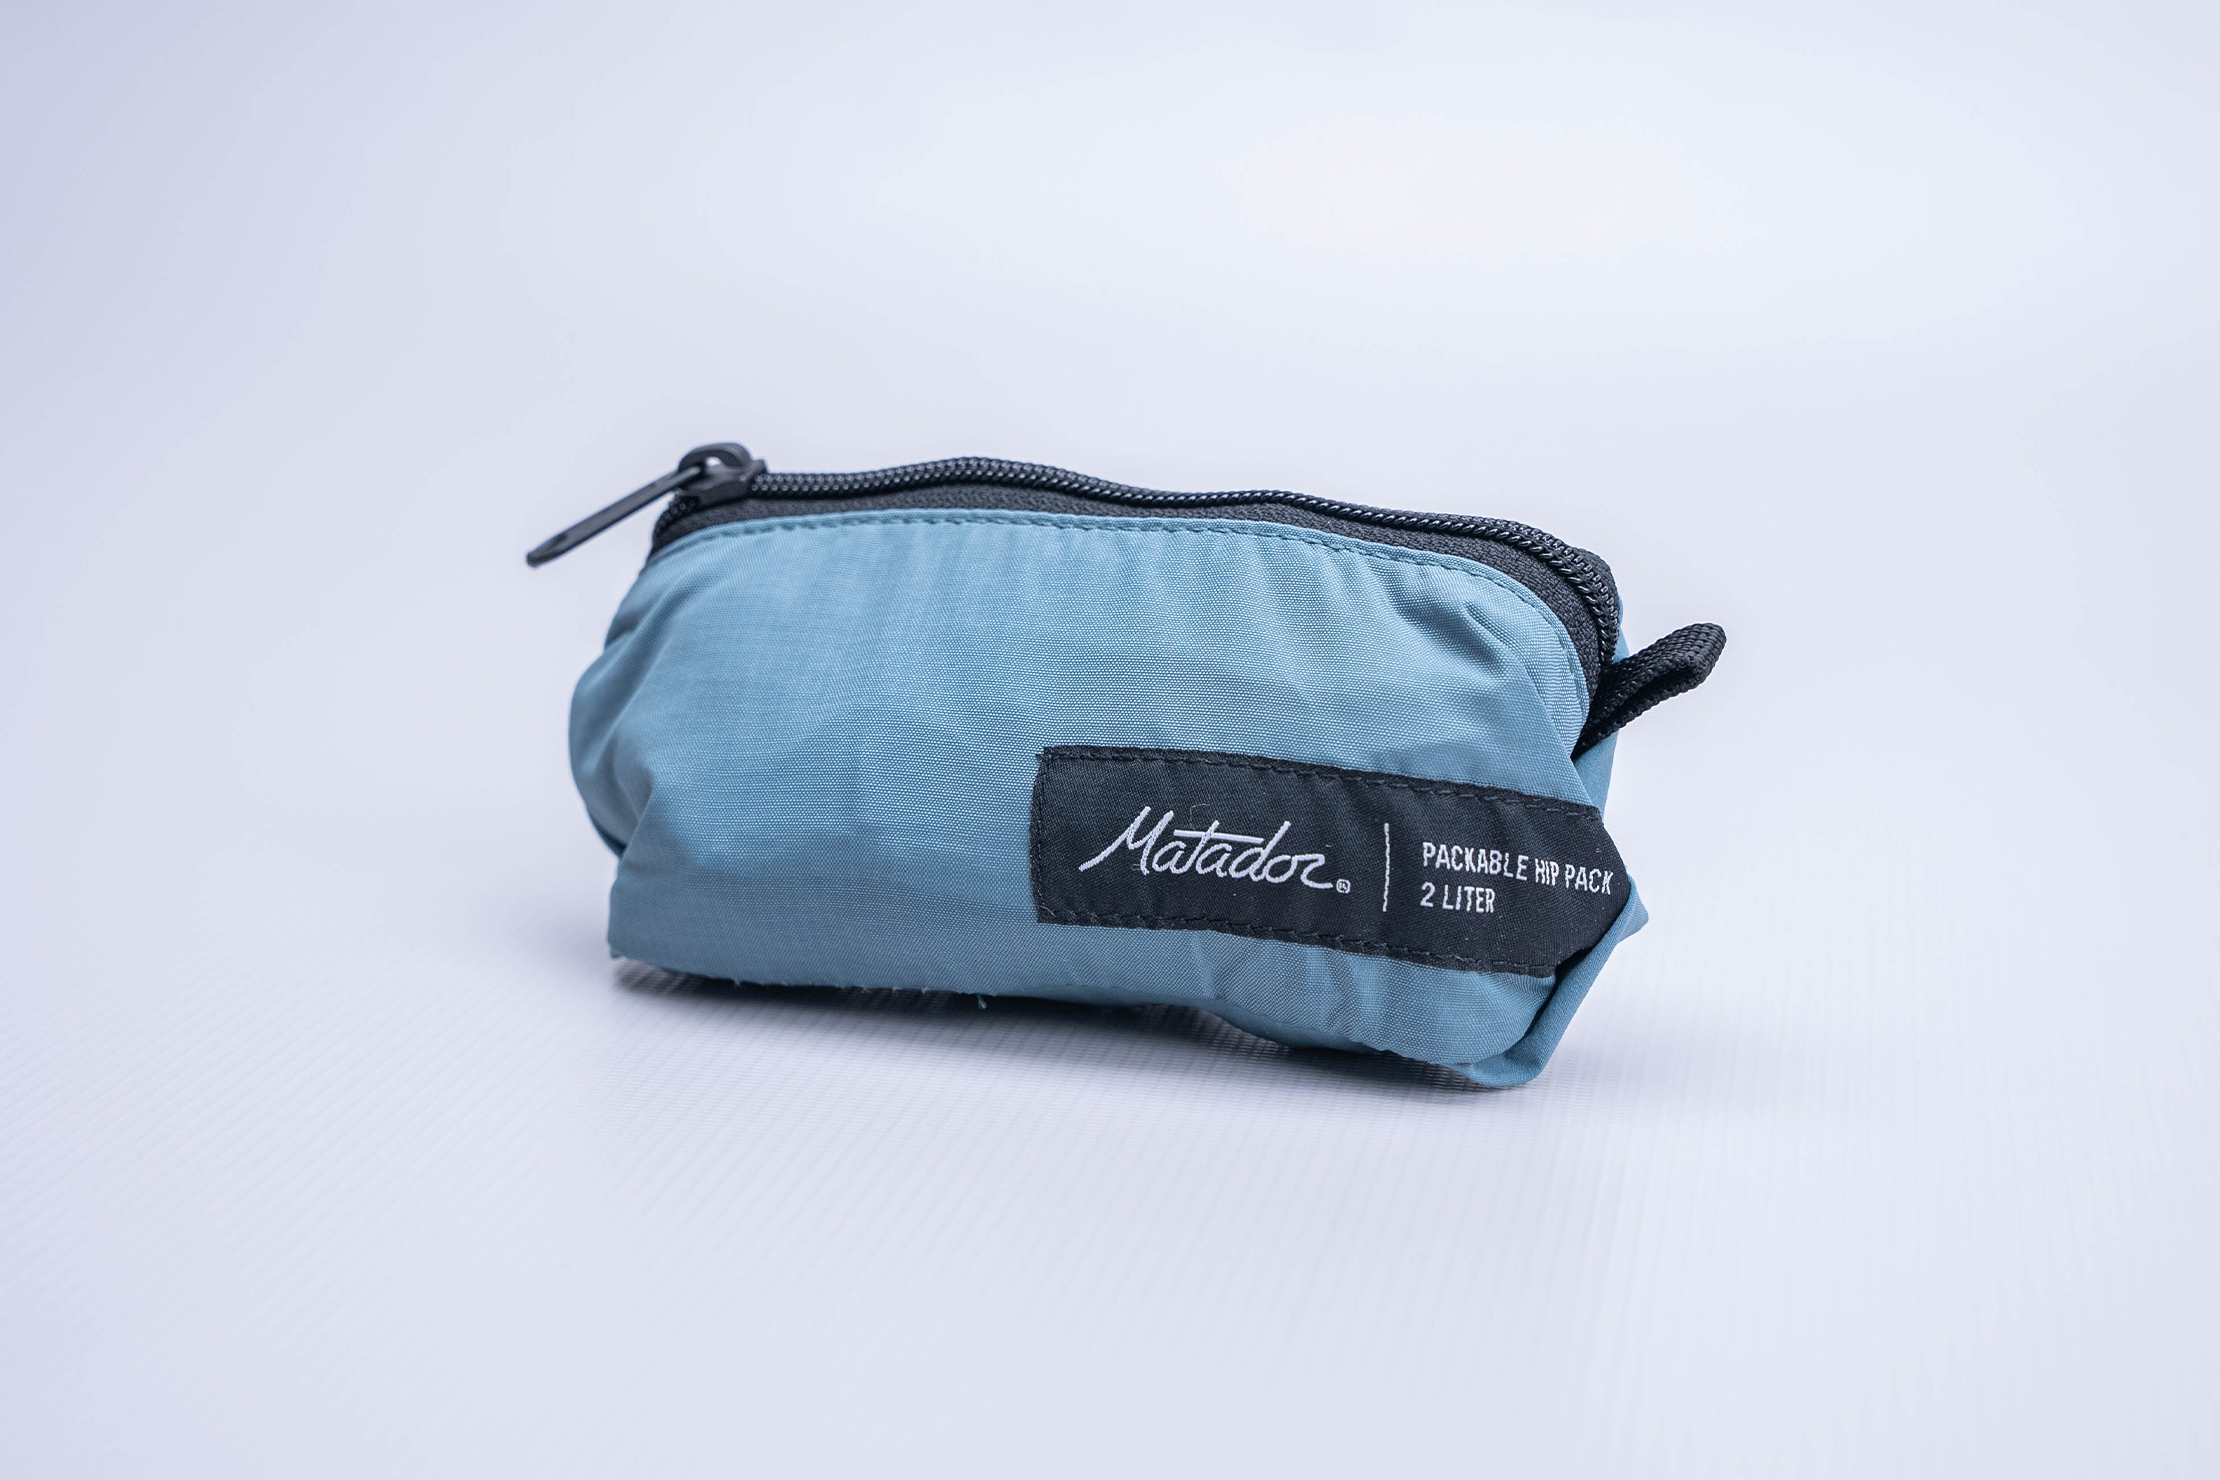 Matador ReFraction Packable Sling Packed